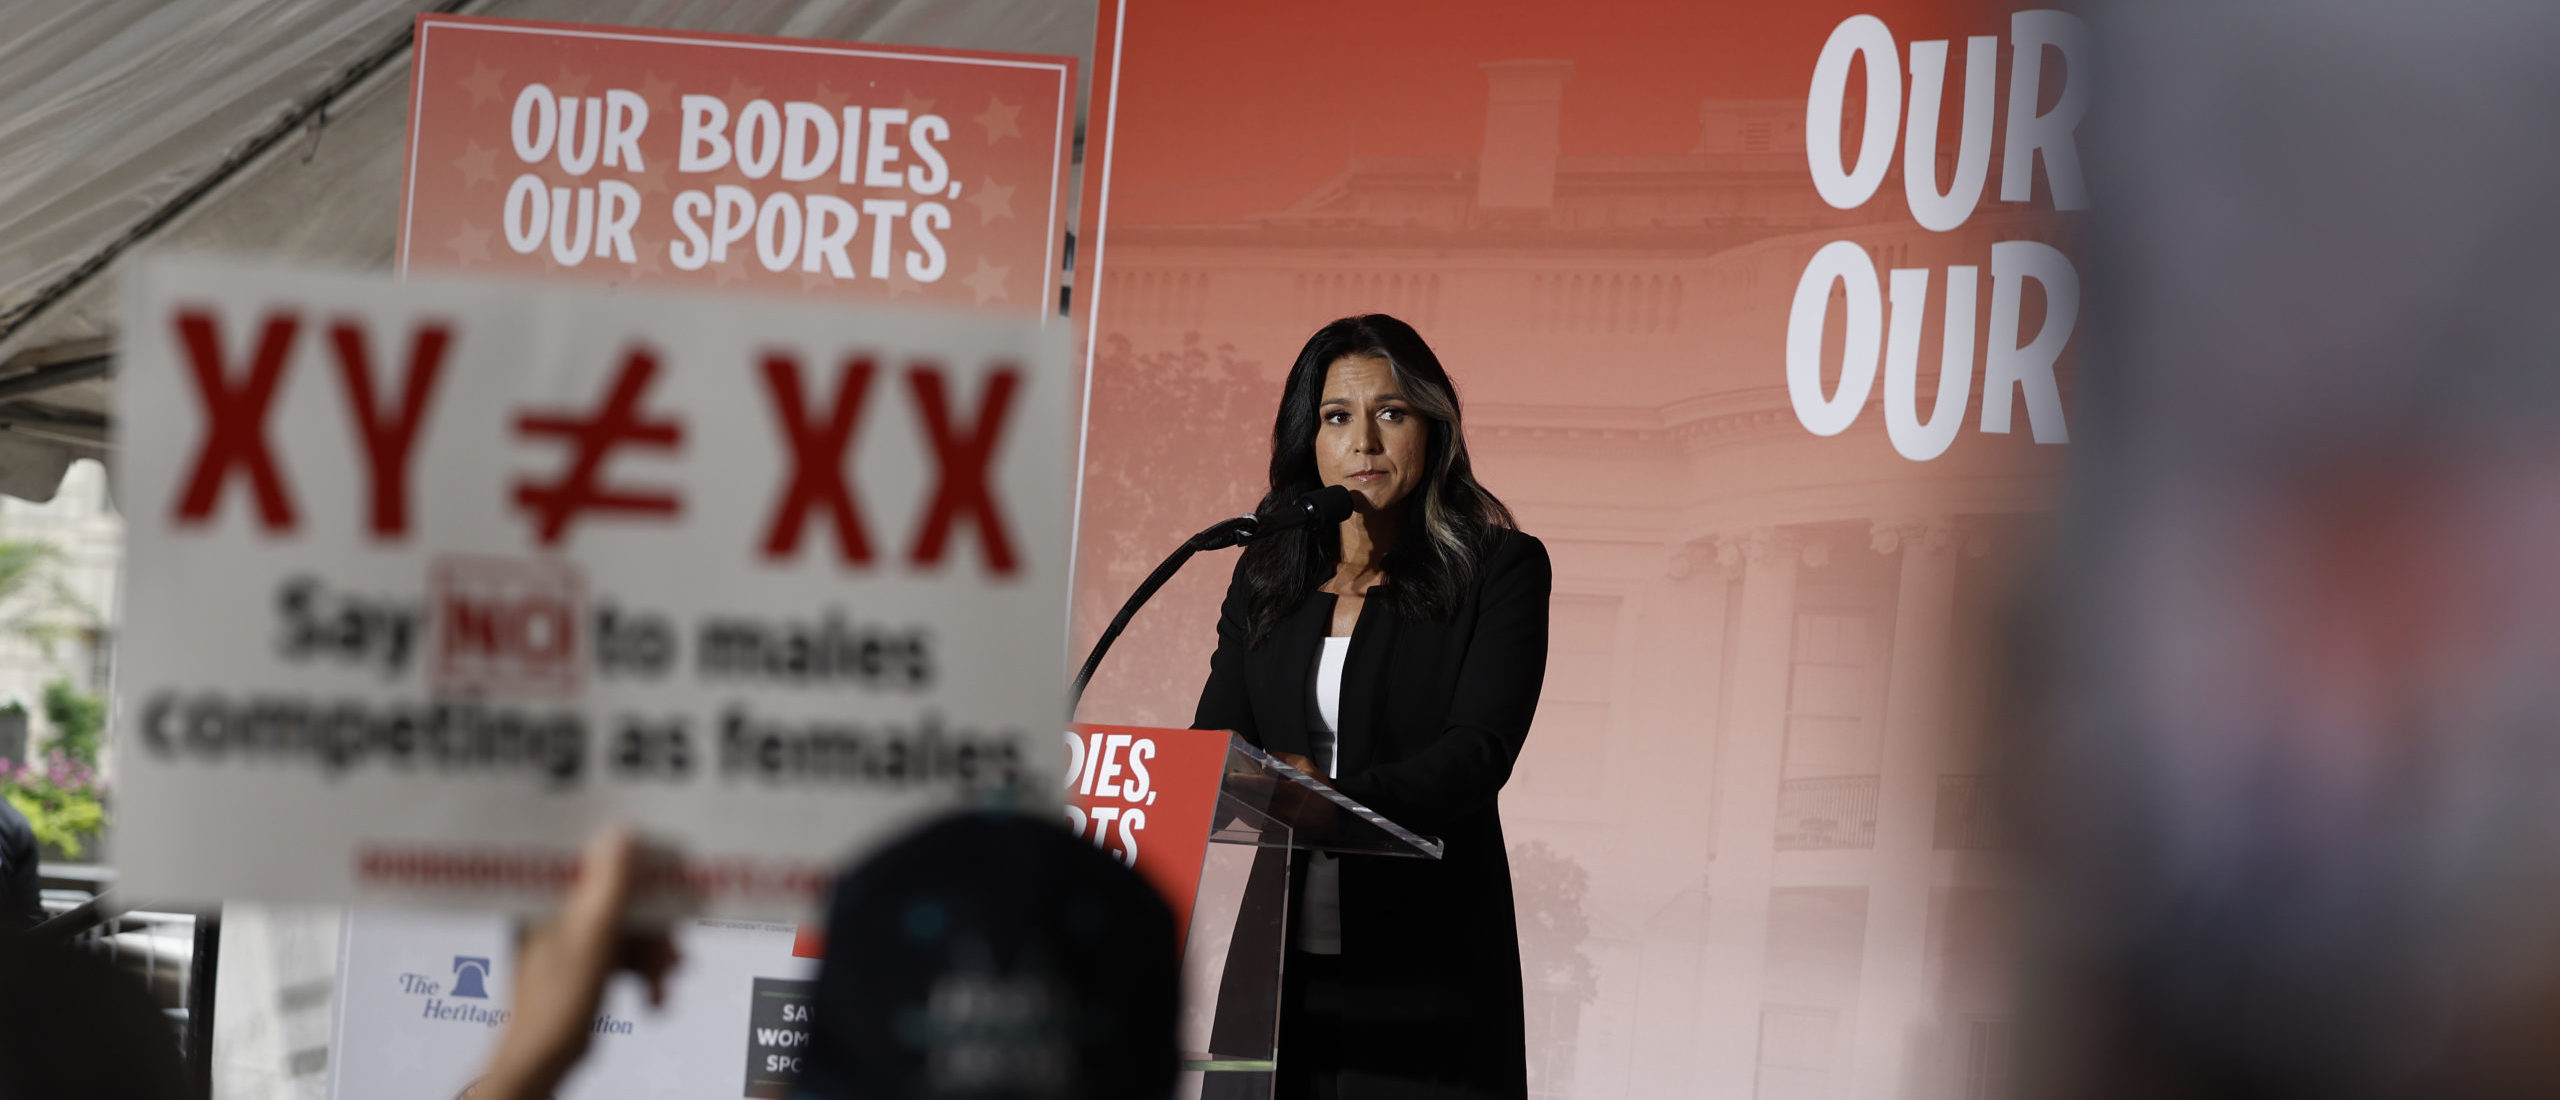 Former U.S. Rep. Tulsi Gabbard (D-HI) speaks at an "Our Bodies, Our Sports" rally to mark the 50th anniversary of Title IX at Freedom Plaza on June 23, 2022 in Washington, DC.